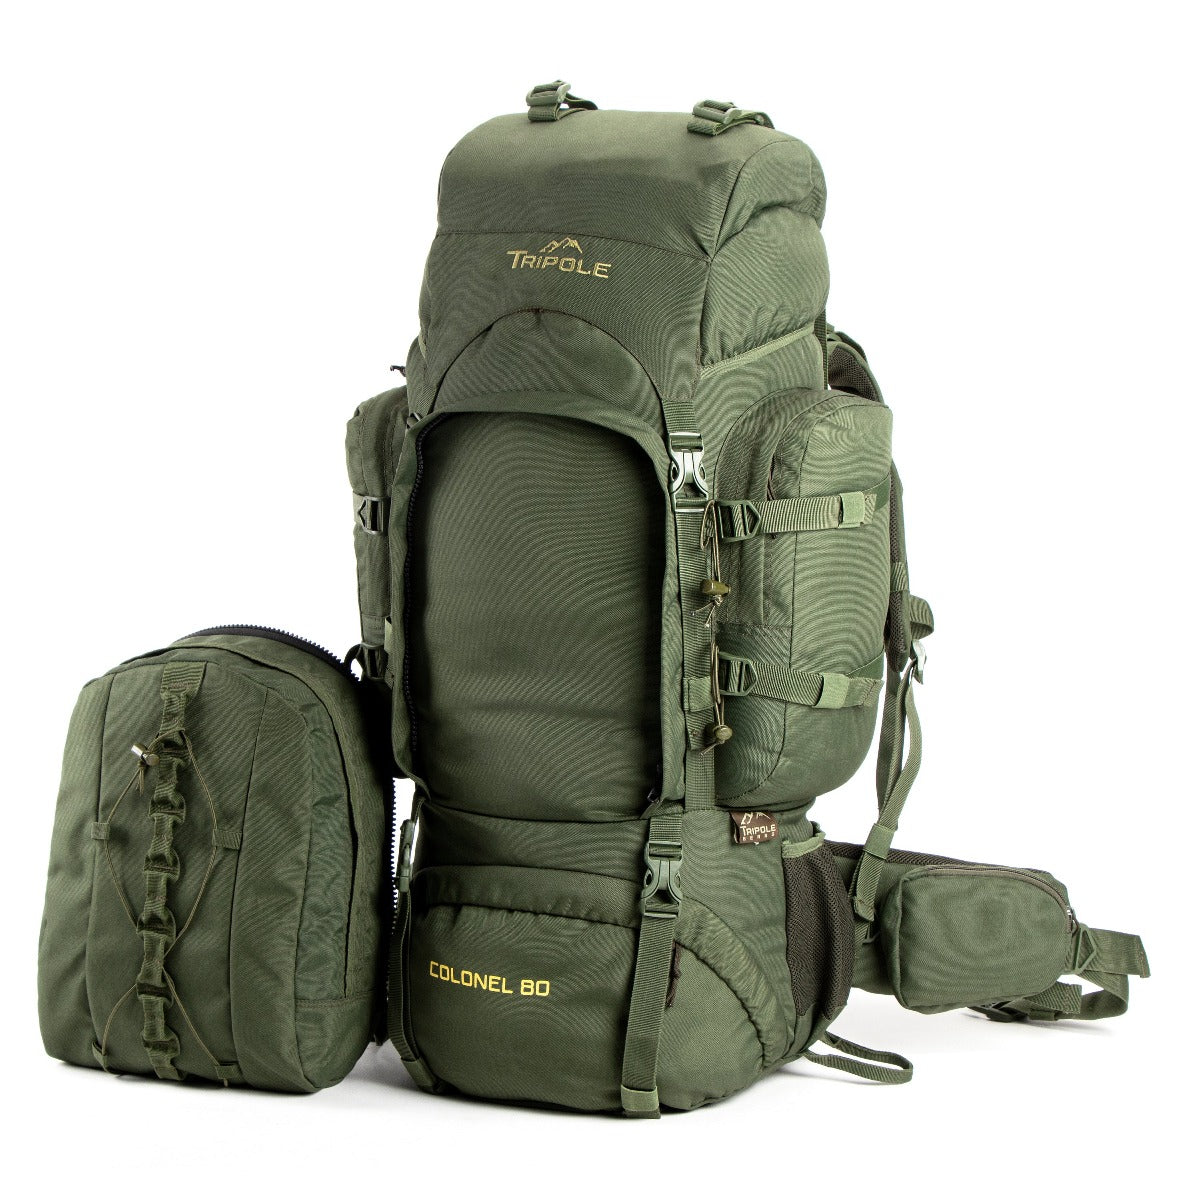 Colonel Series Rucksack + Detachable Day Pack & Rain Cover - 80 Litres- Army Green 6